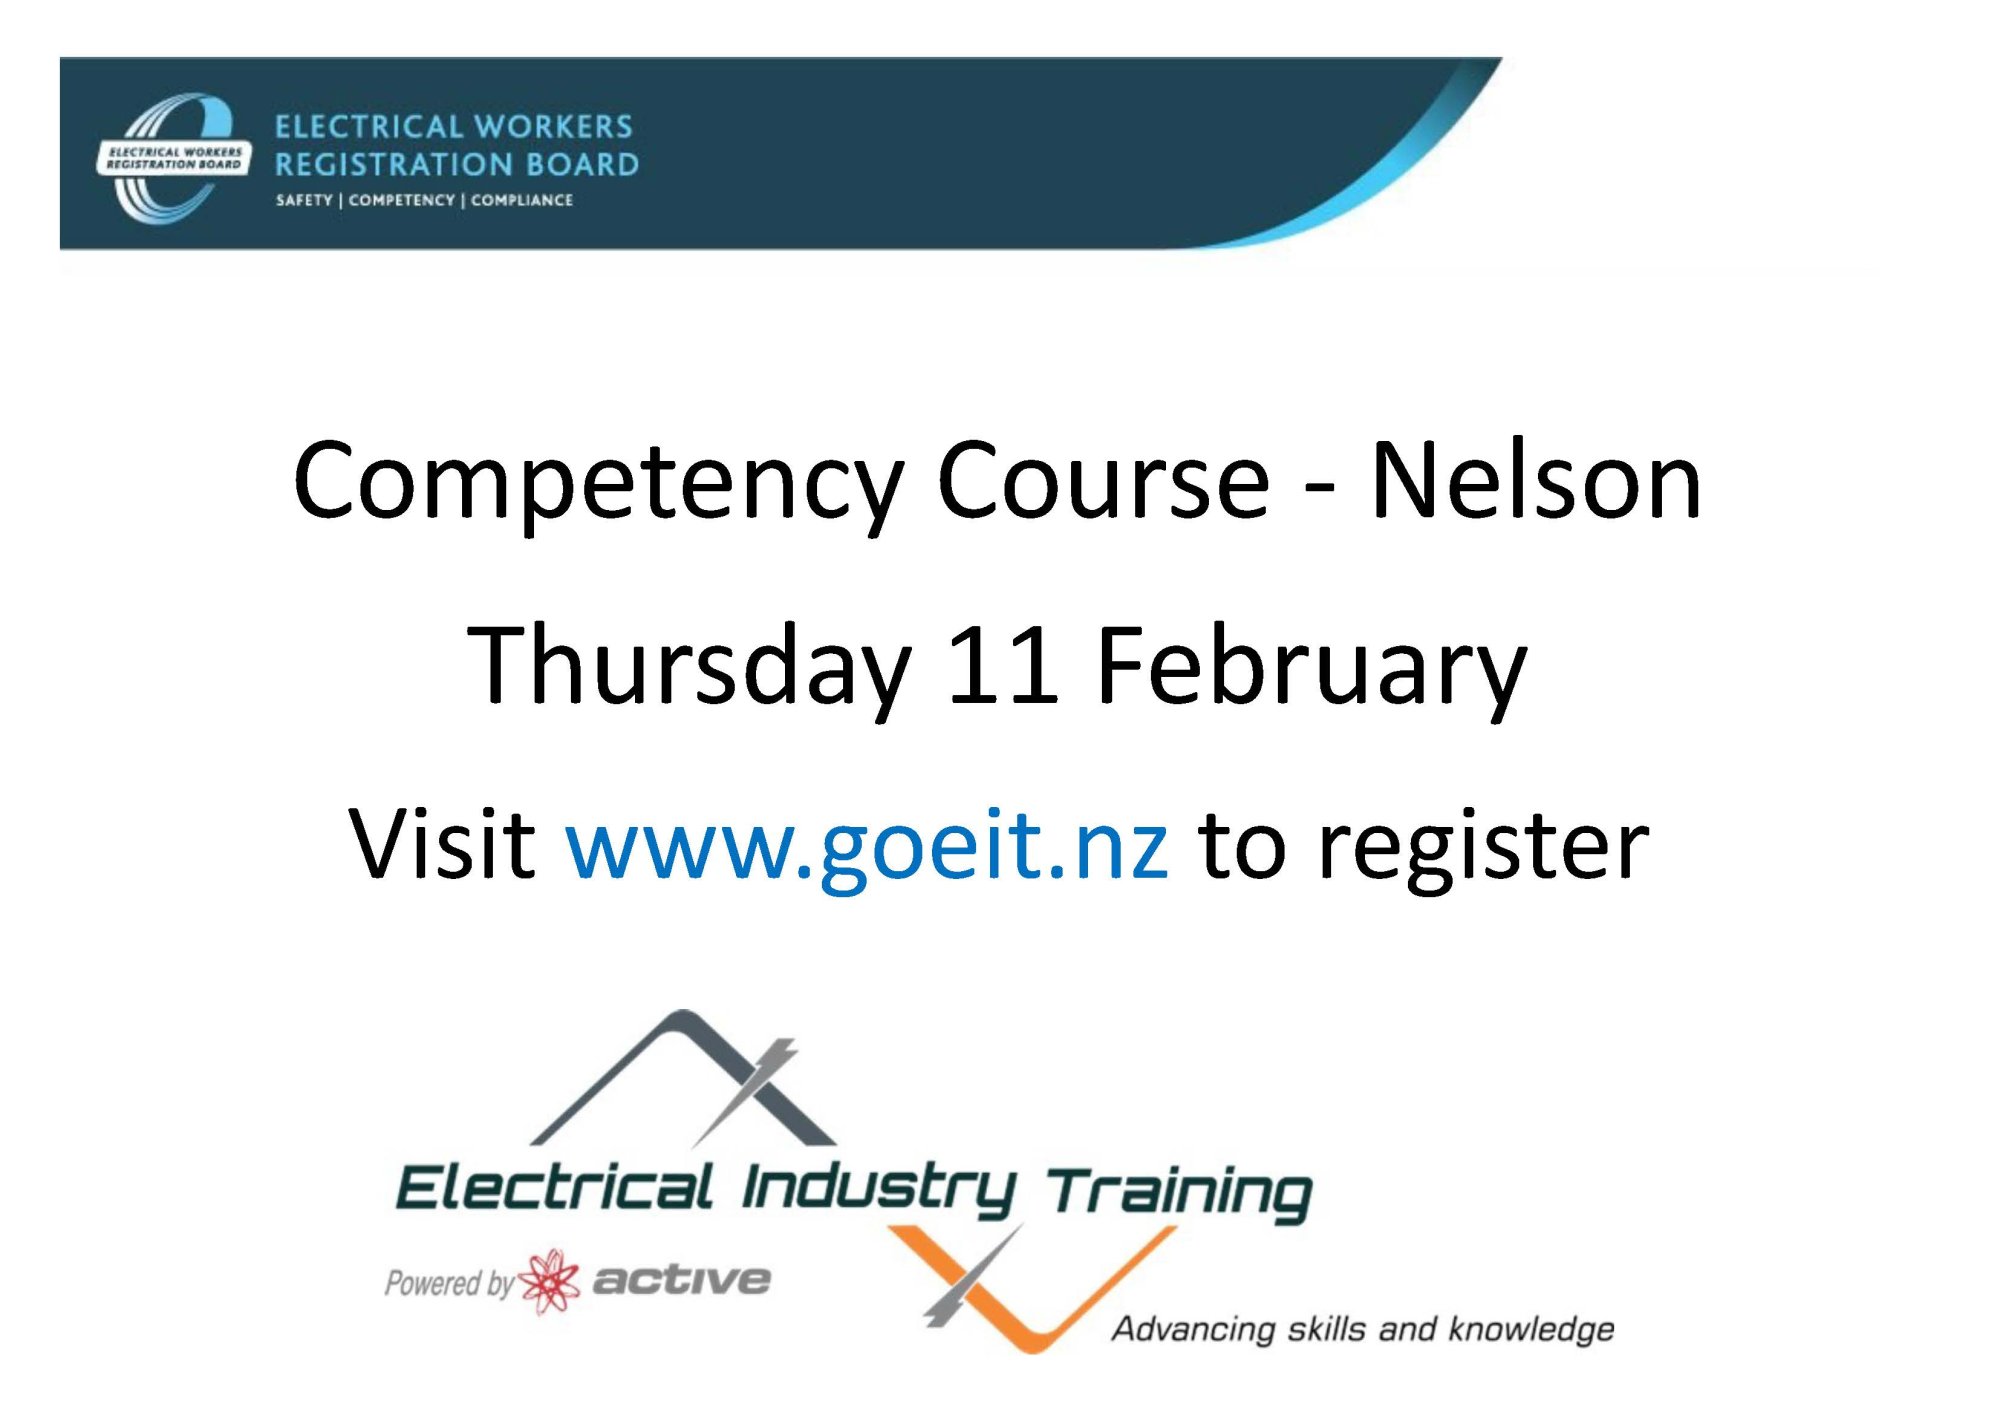 Nelson Competency Course